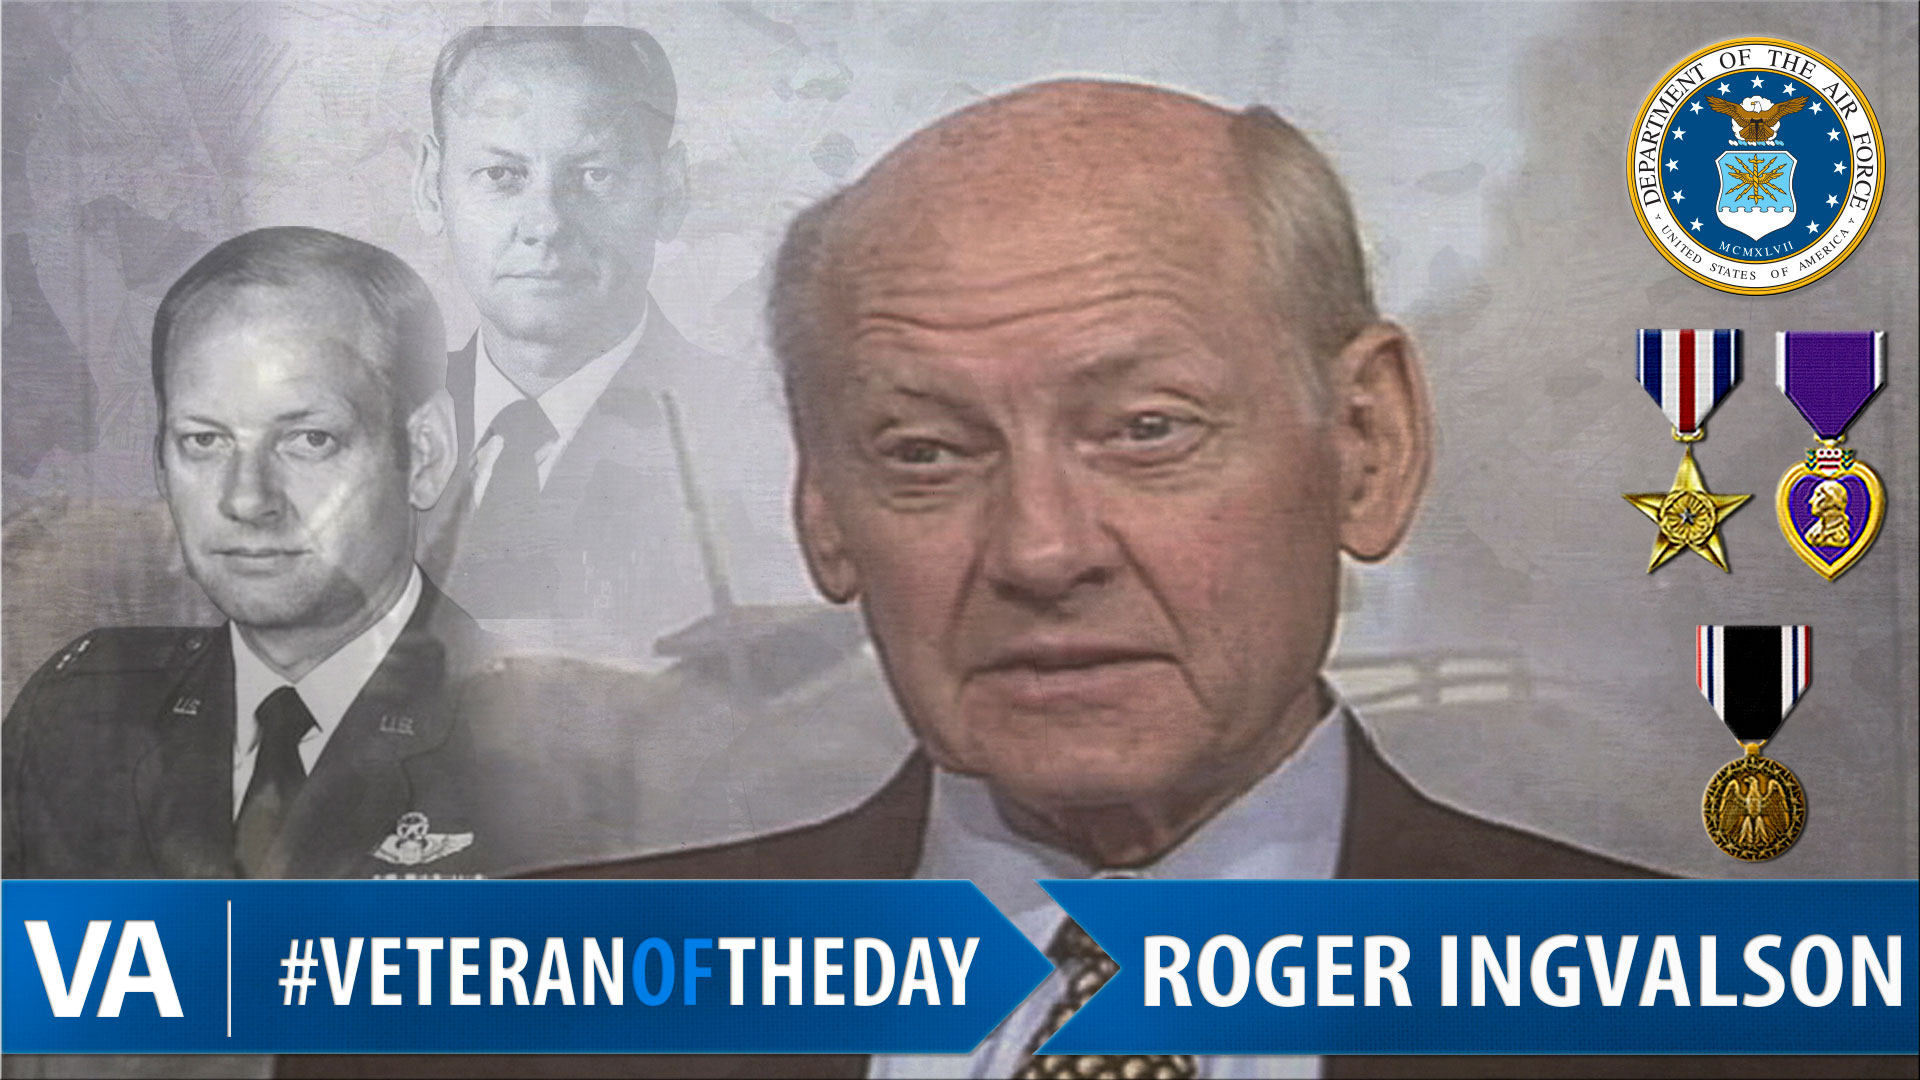 Roger Ingvalson - Veteran of the Day